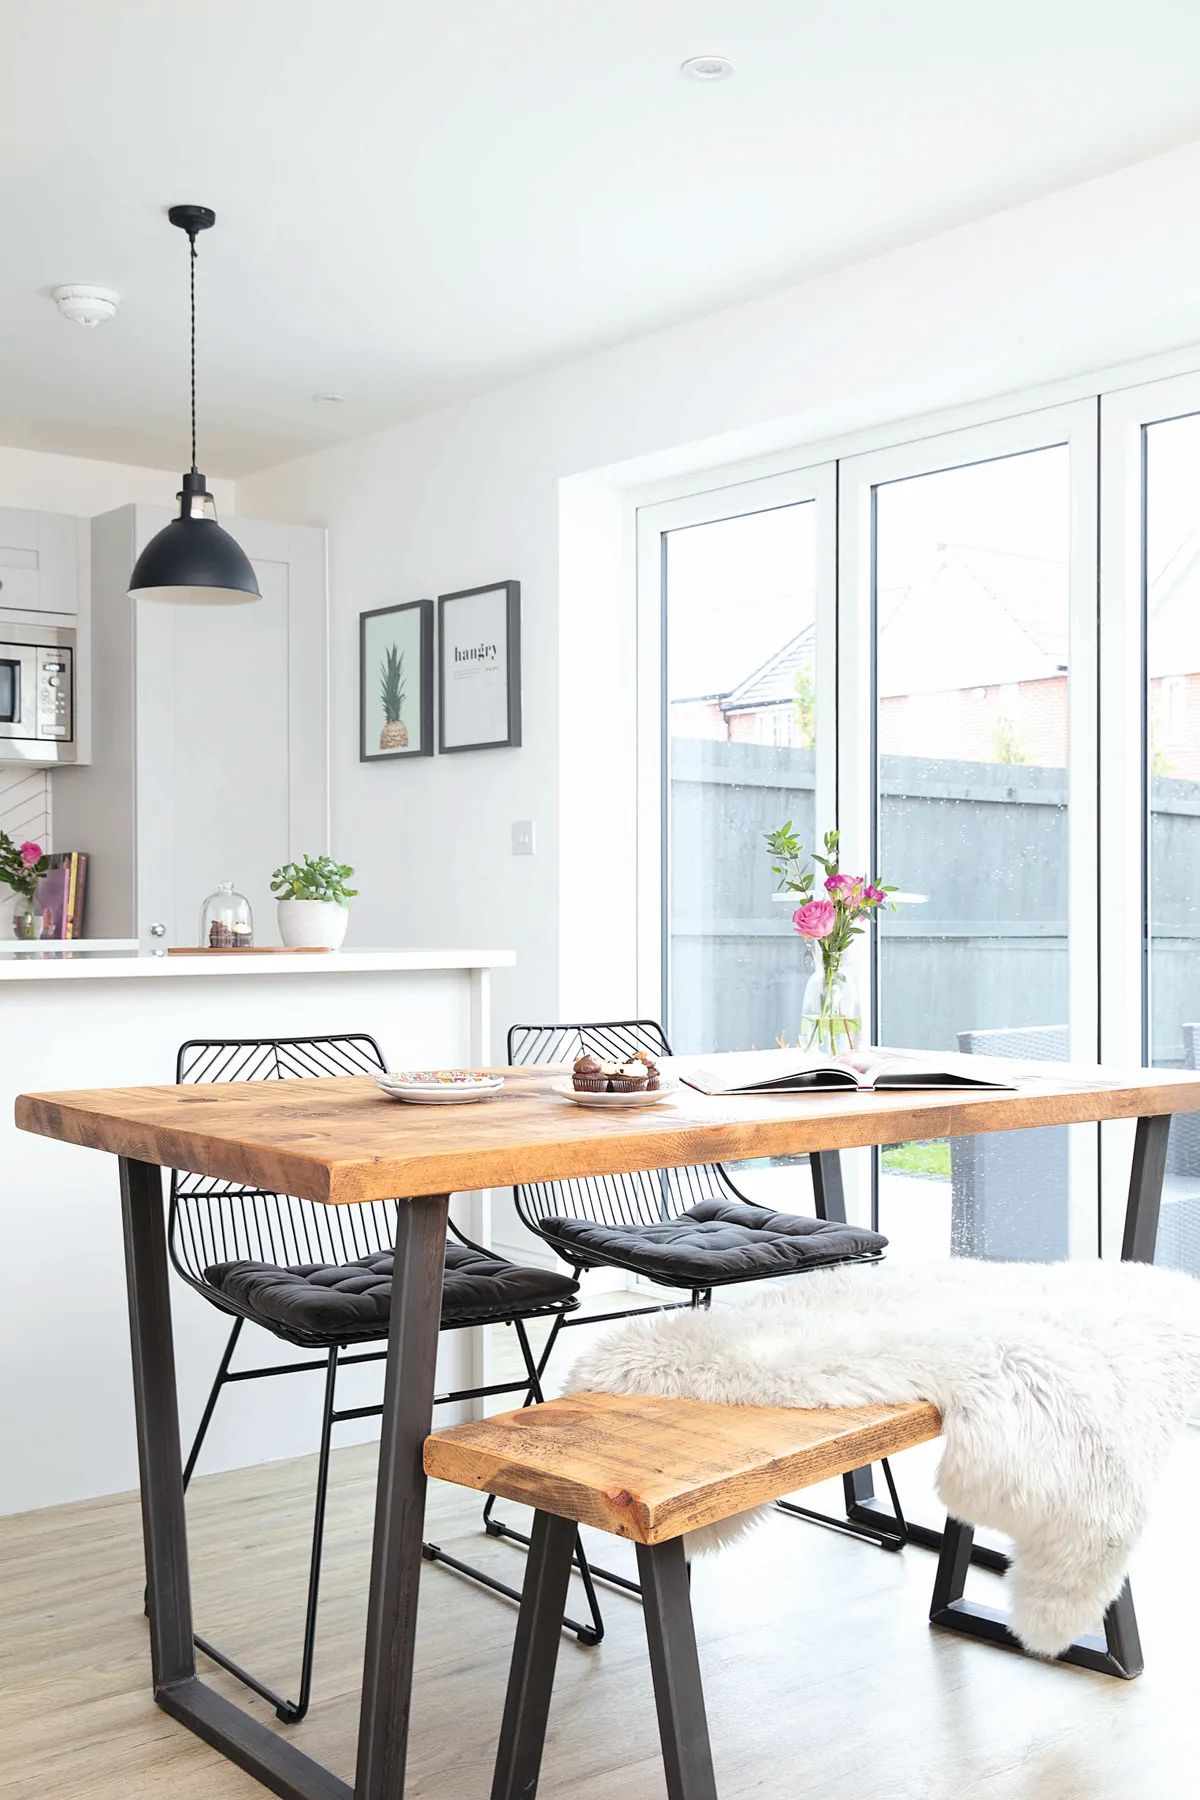 ‘I’d describe my style as boho Scandi industrial, so this reclaimed wood dining table and bench from Storm Interiors in Nottingham fits in well. The Siena dining chairs from Dunelm were a bargain at £129 for the pair’